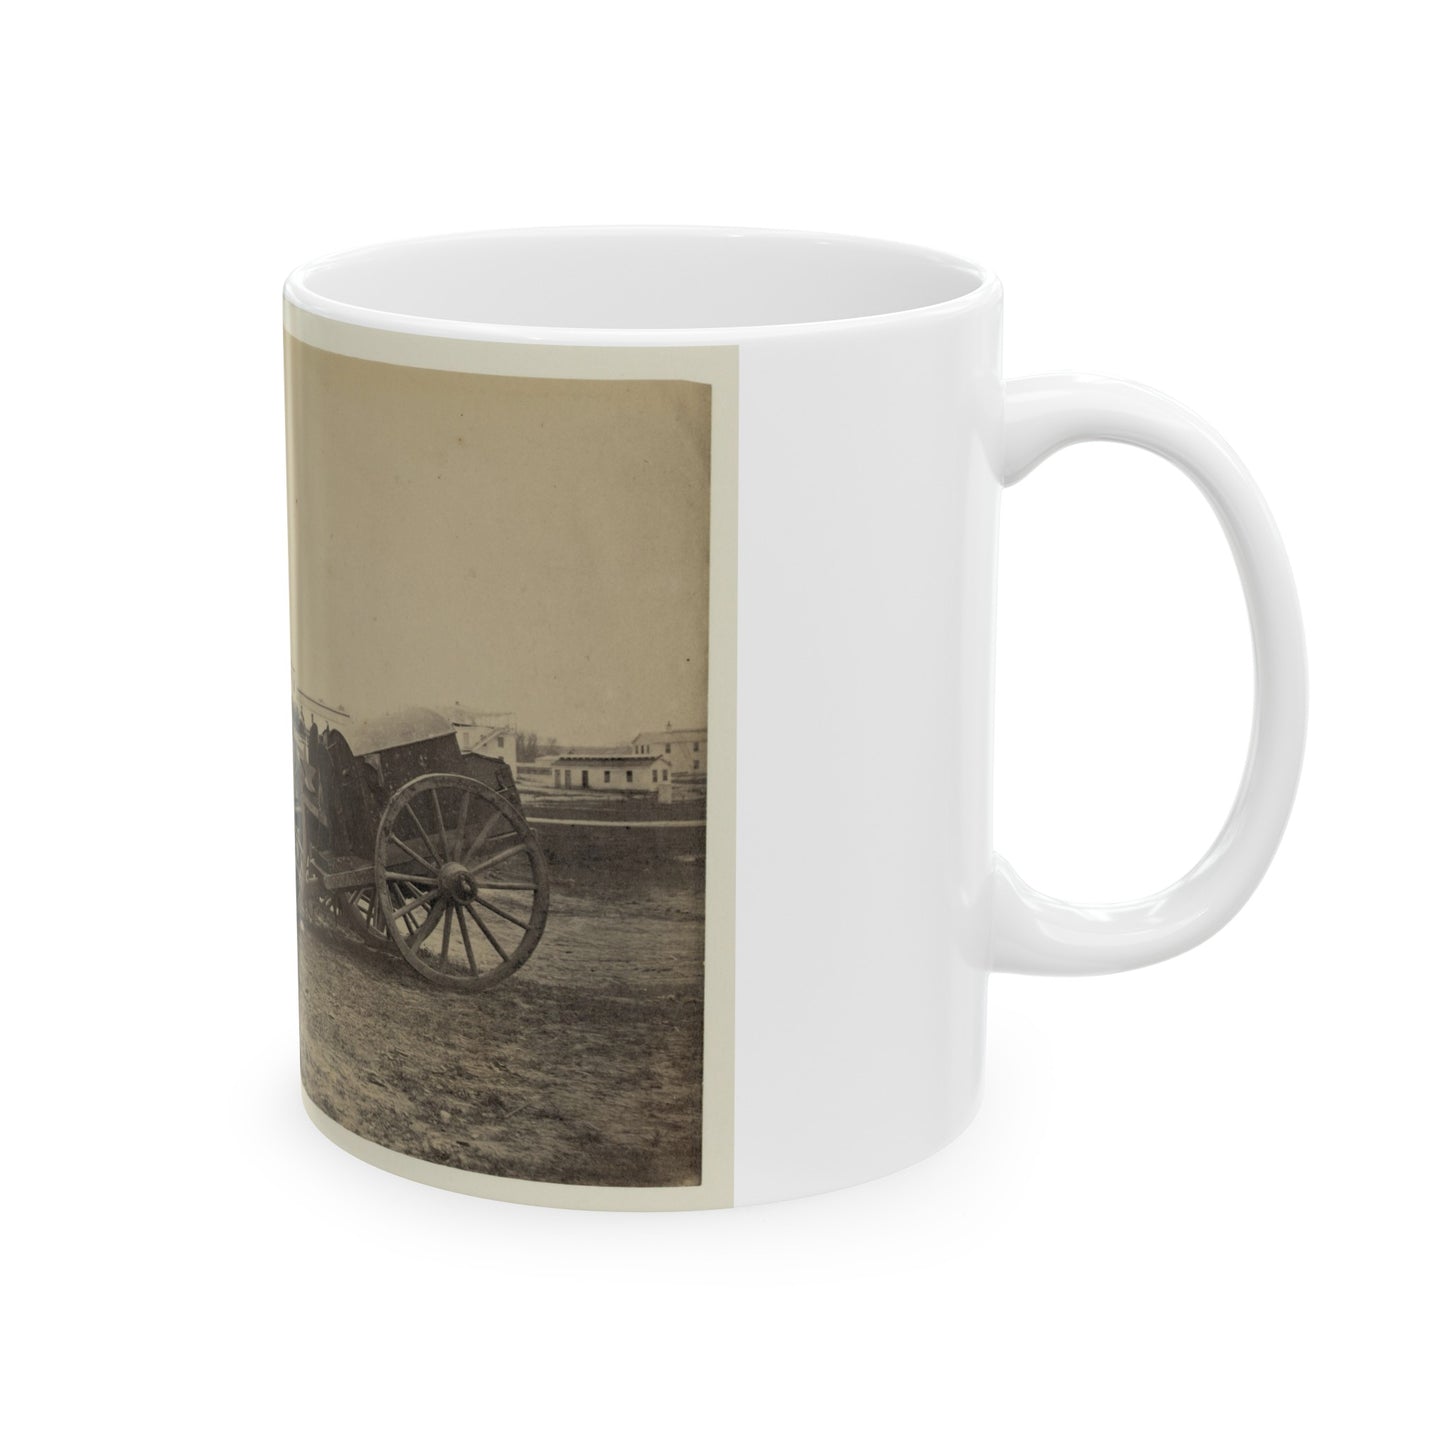 Wagons With Caisson In Foreground, Probably At A Civil War Military Camp (U.S. Civil War) White Coffee Mug